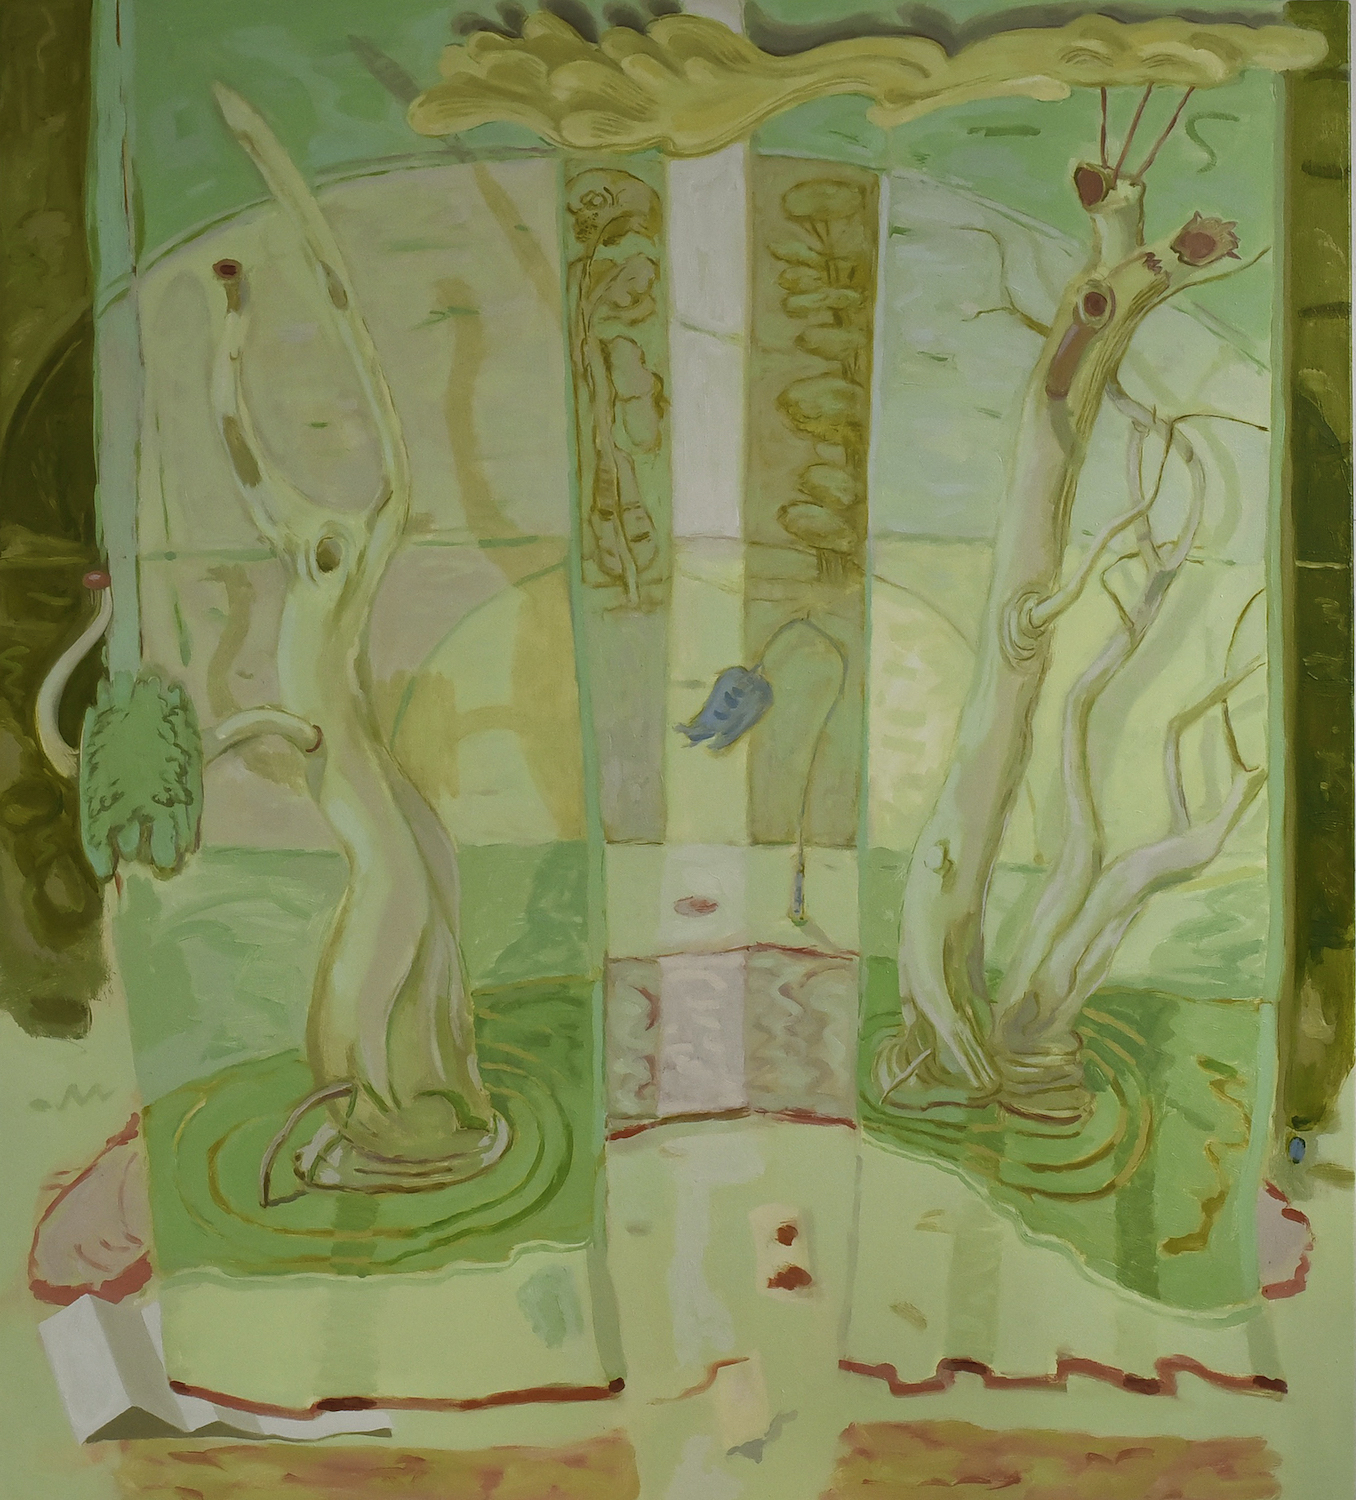 'Greensleeves With Fixed Penalty Notice', Angelina Davis, Oil on canvas, 154 x 137 cm